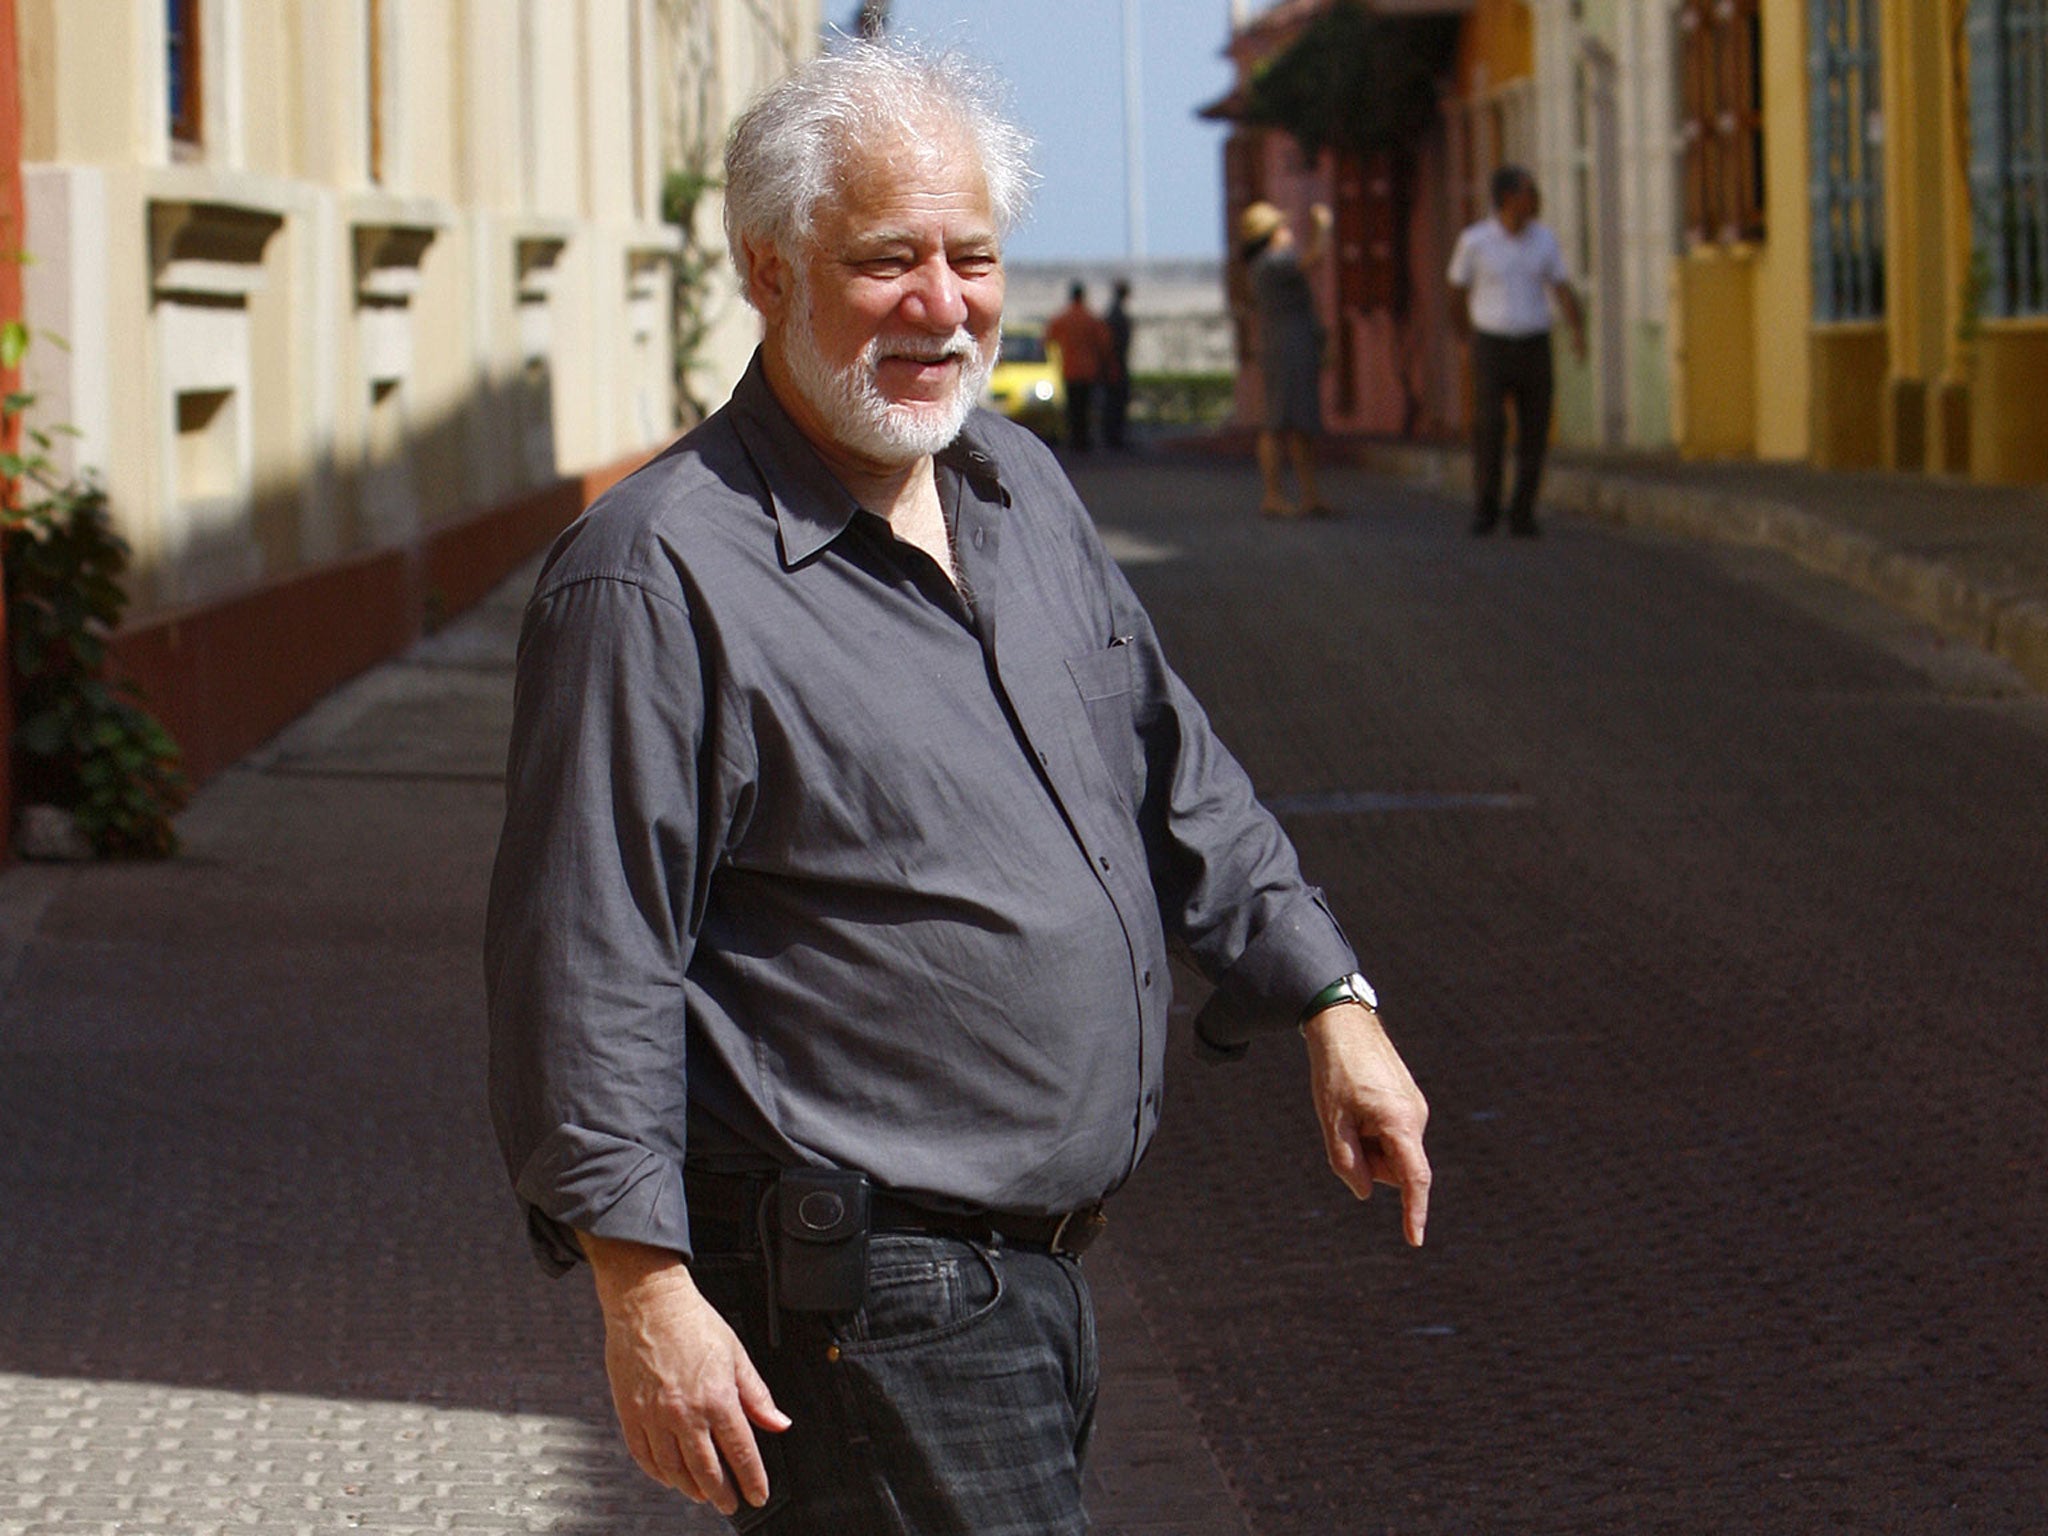 Intriguing introduction: Canadian author Michael Ondaatje